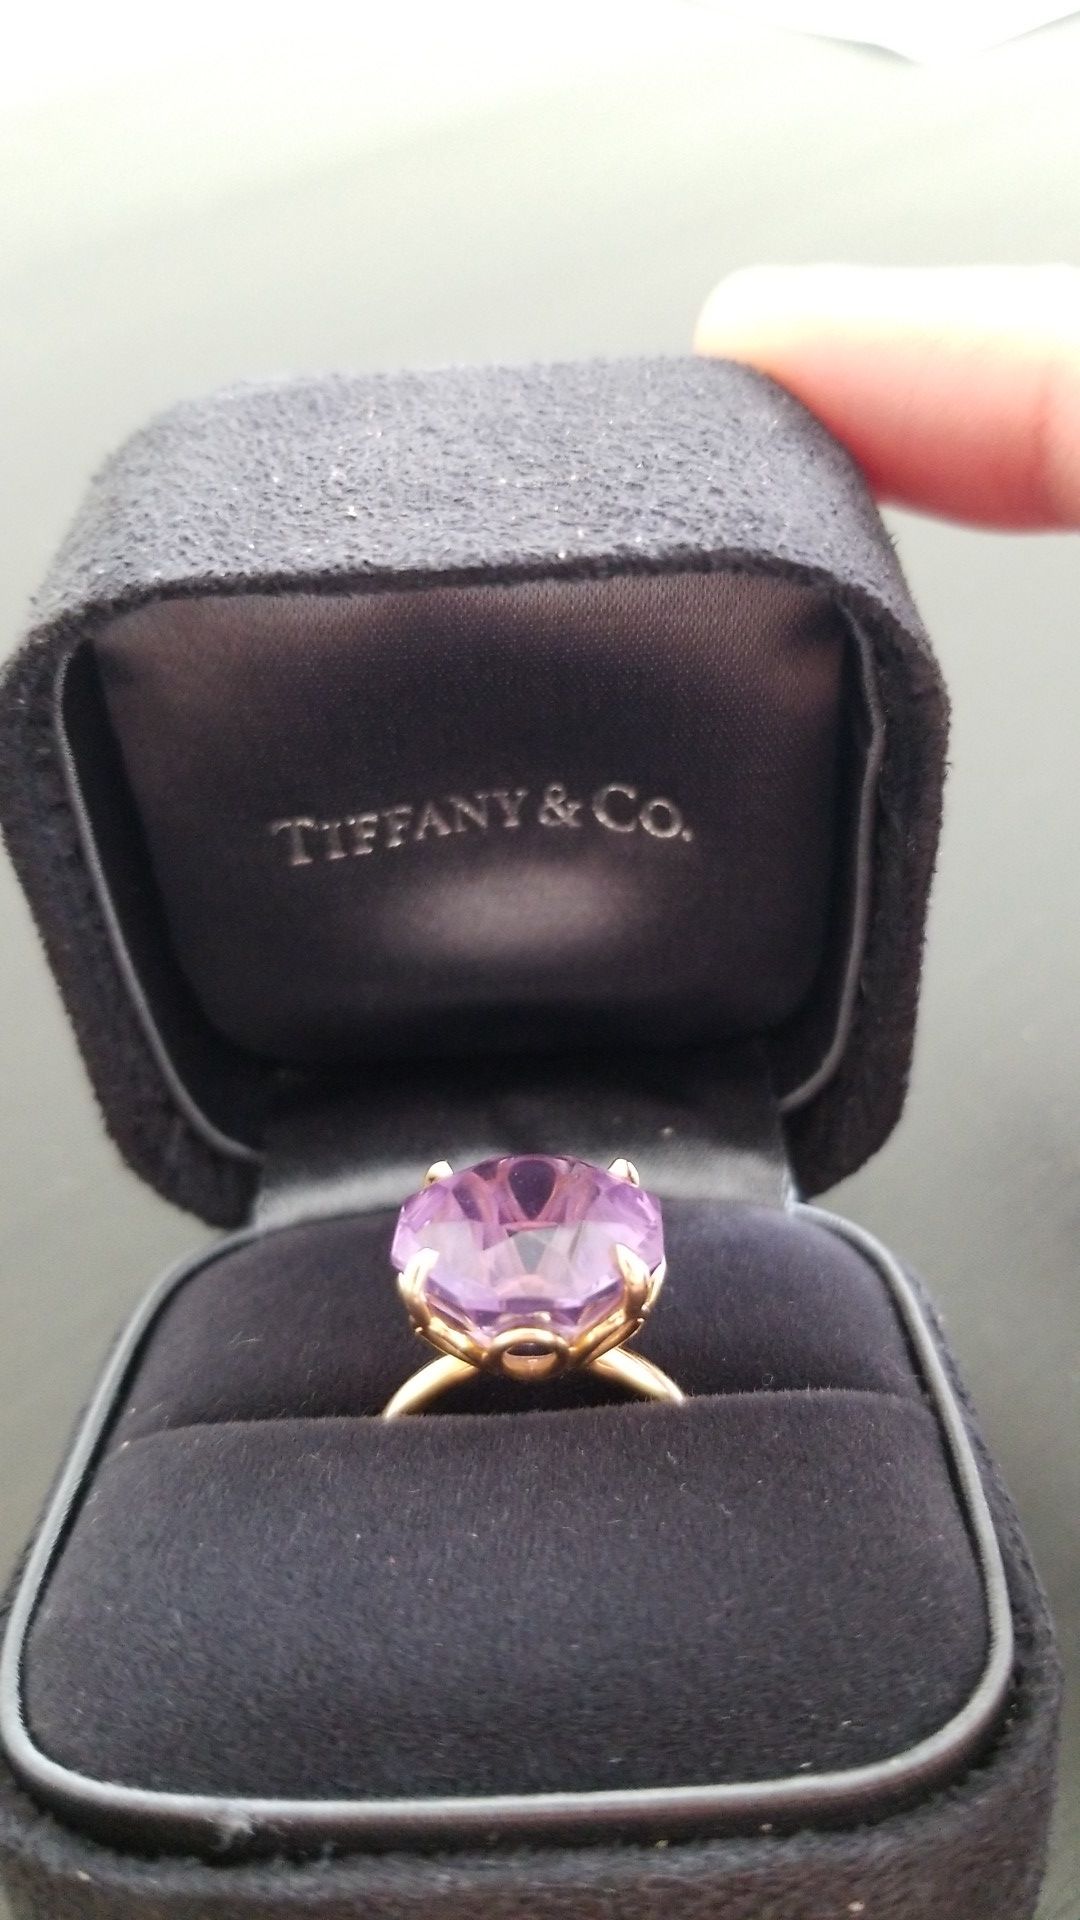 Tiffany's ring sparkler amethyst anniversary engagement jewelry